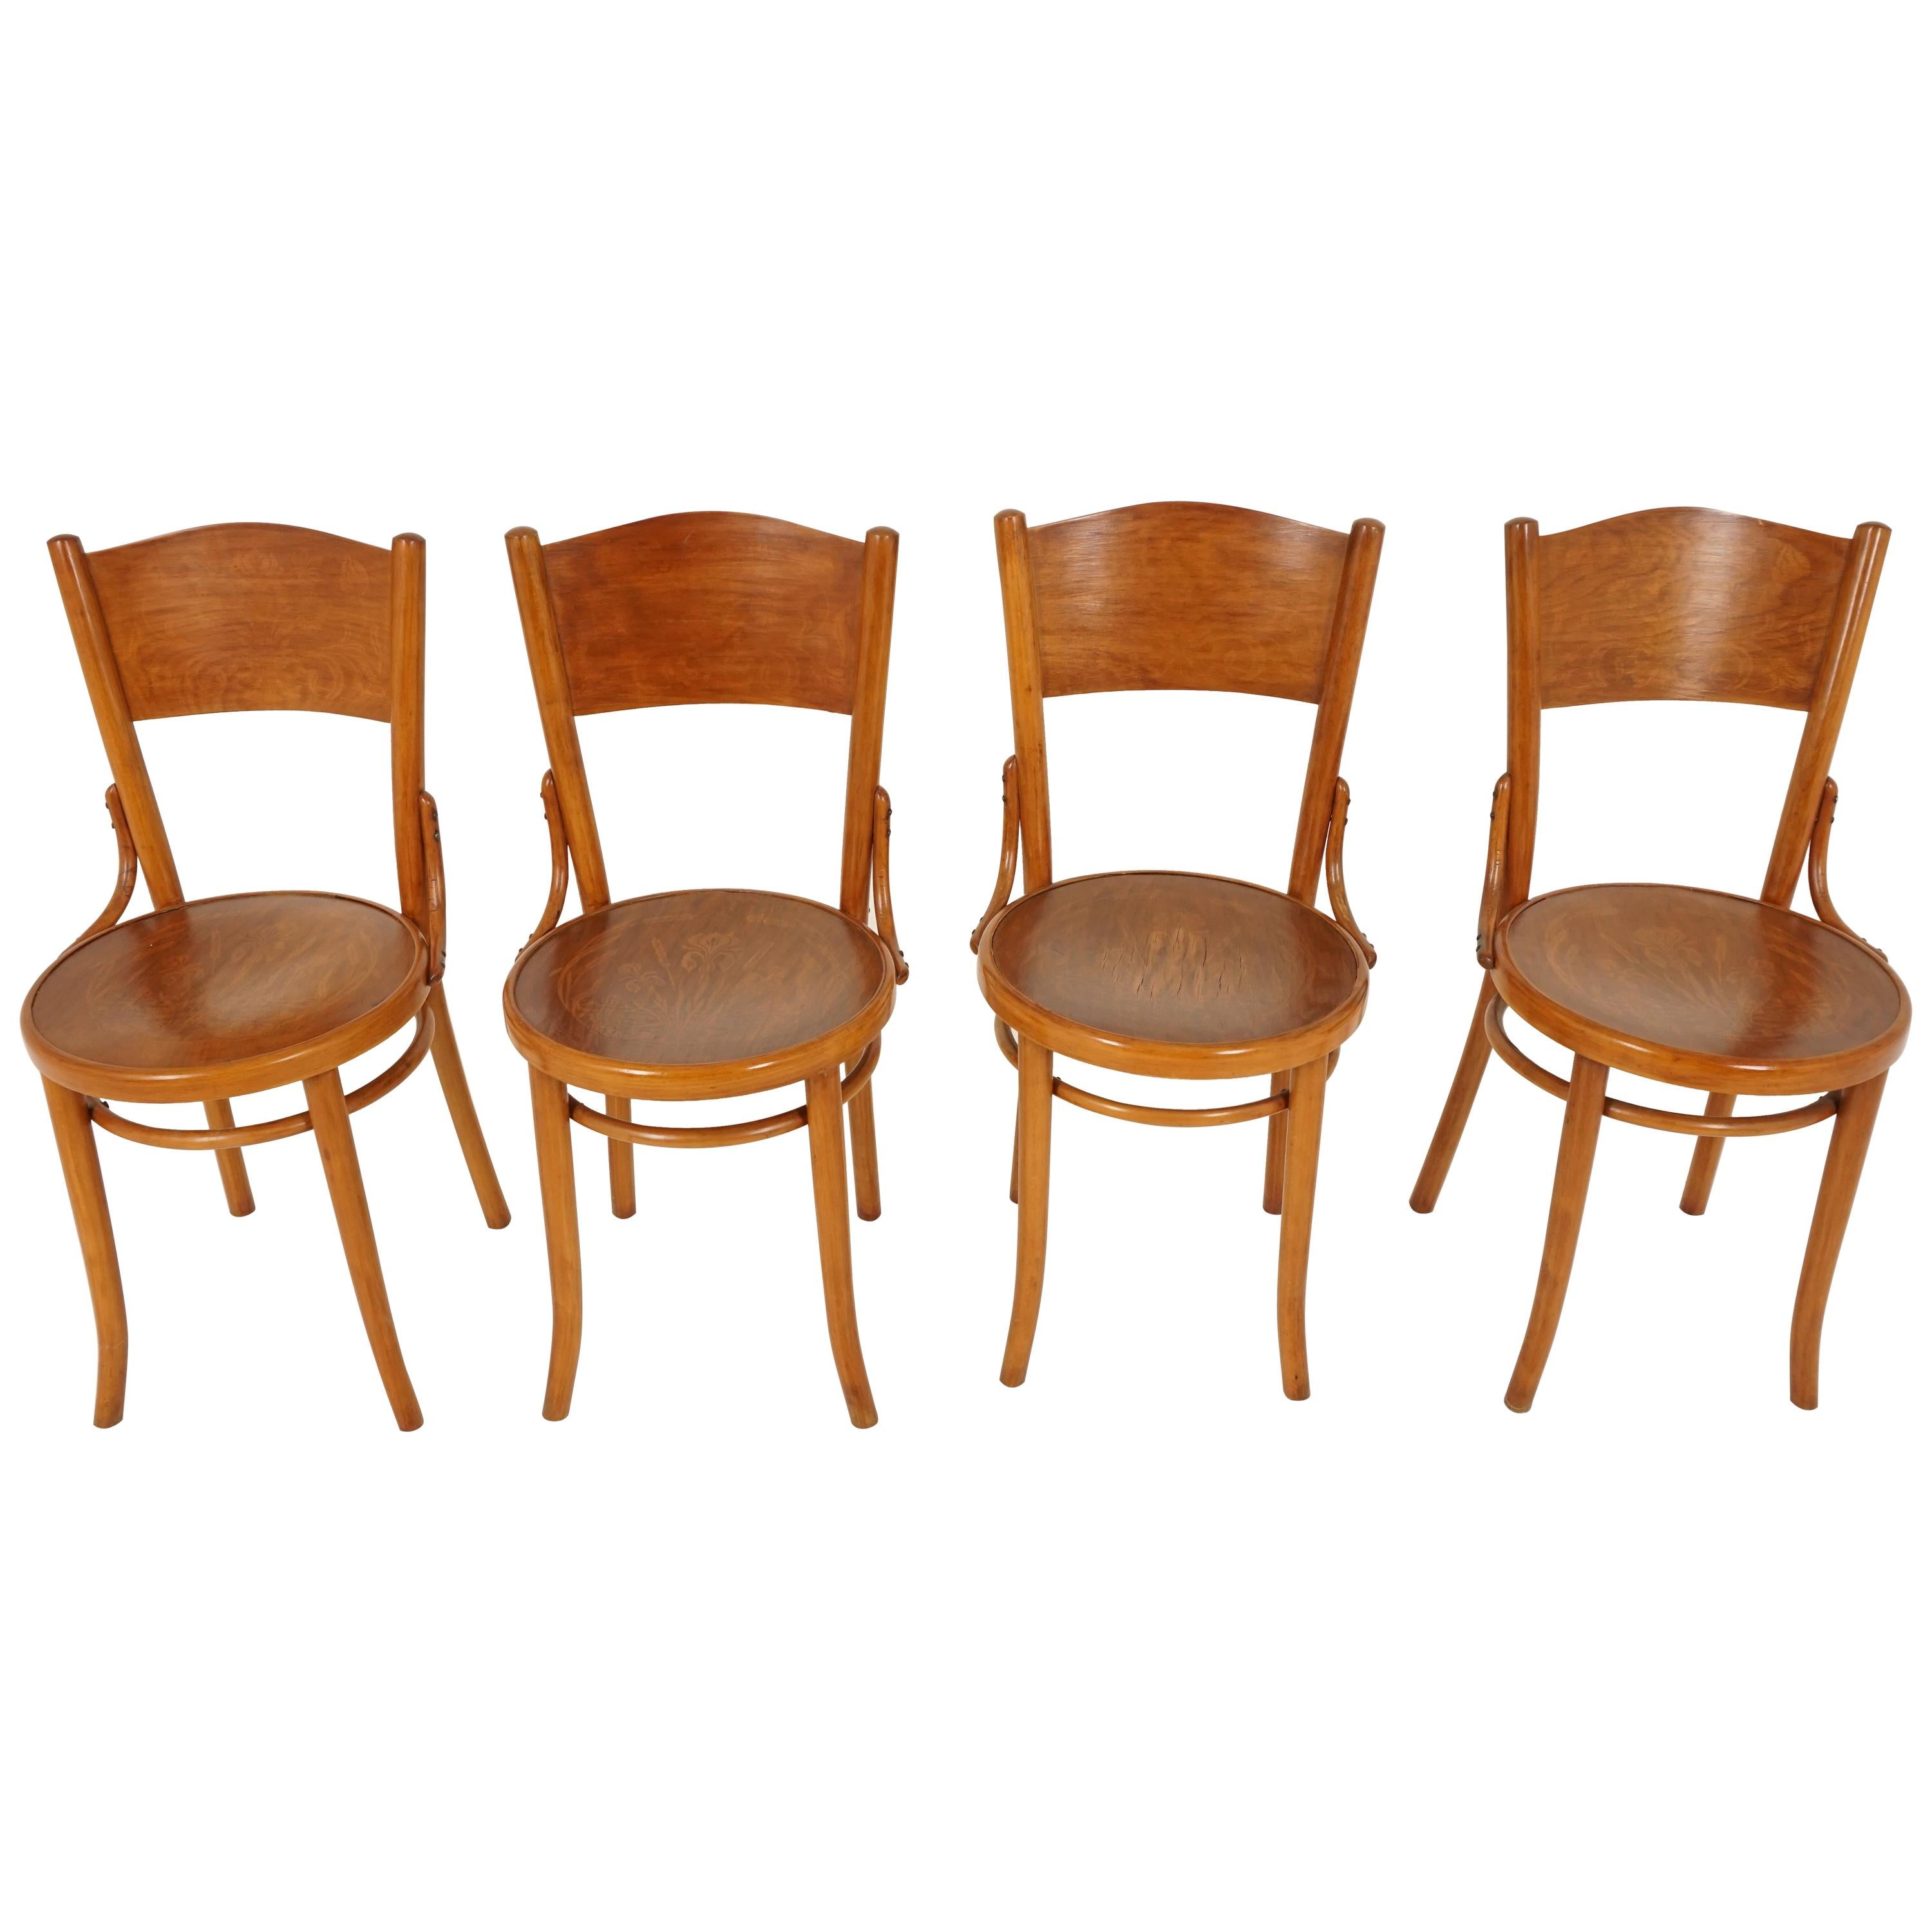 Vintage Bentwood Chairs, Set of 4, "Thonet" Chairs, Czechoslovakia 1930, B2023